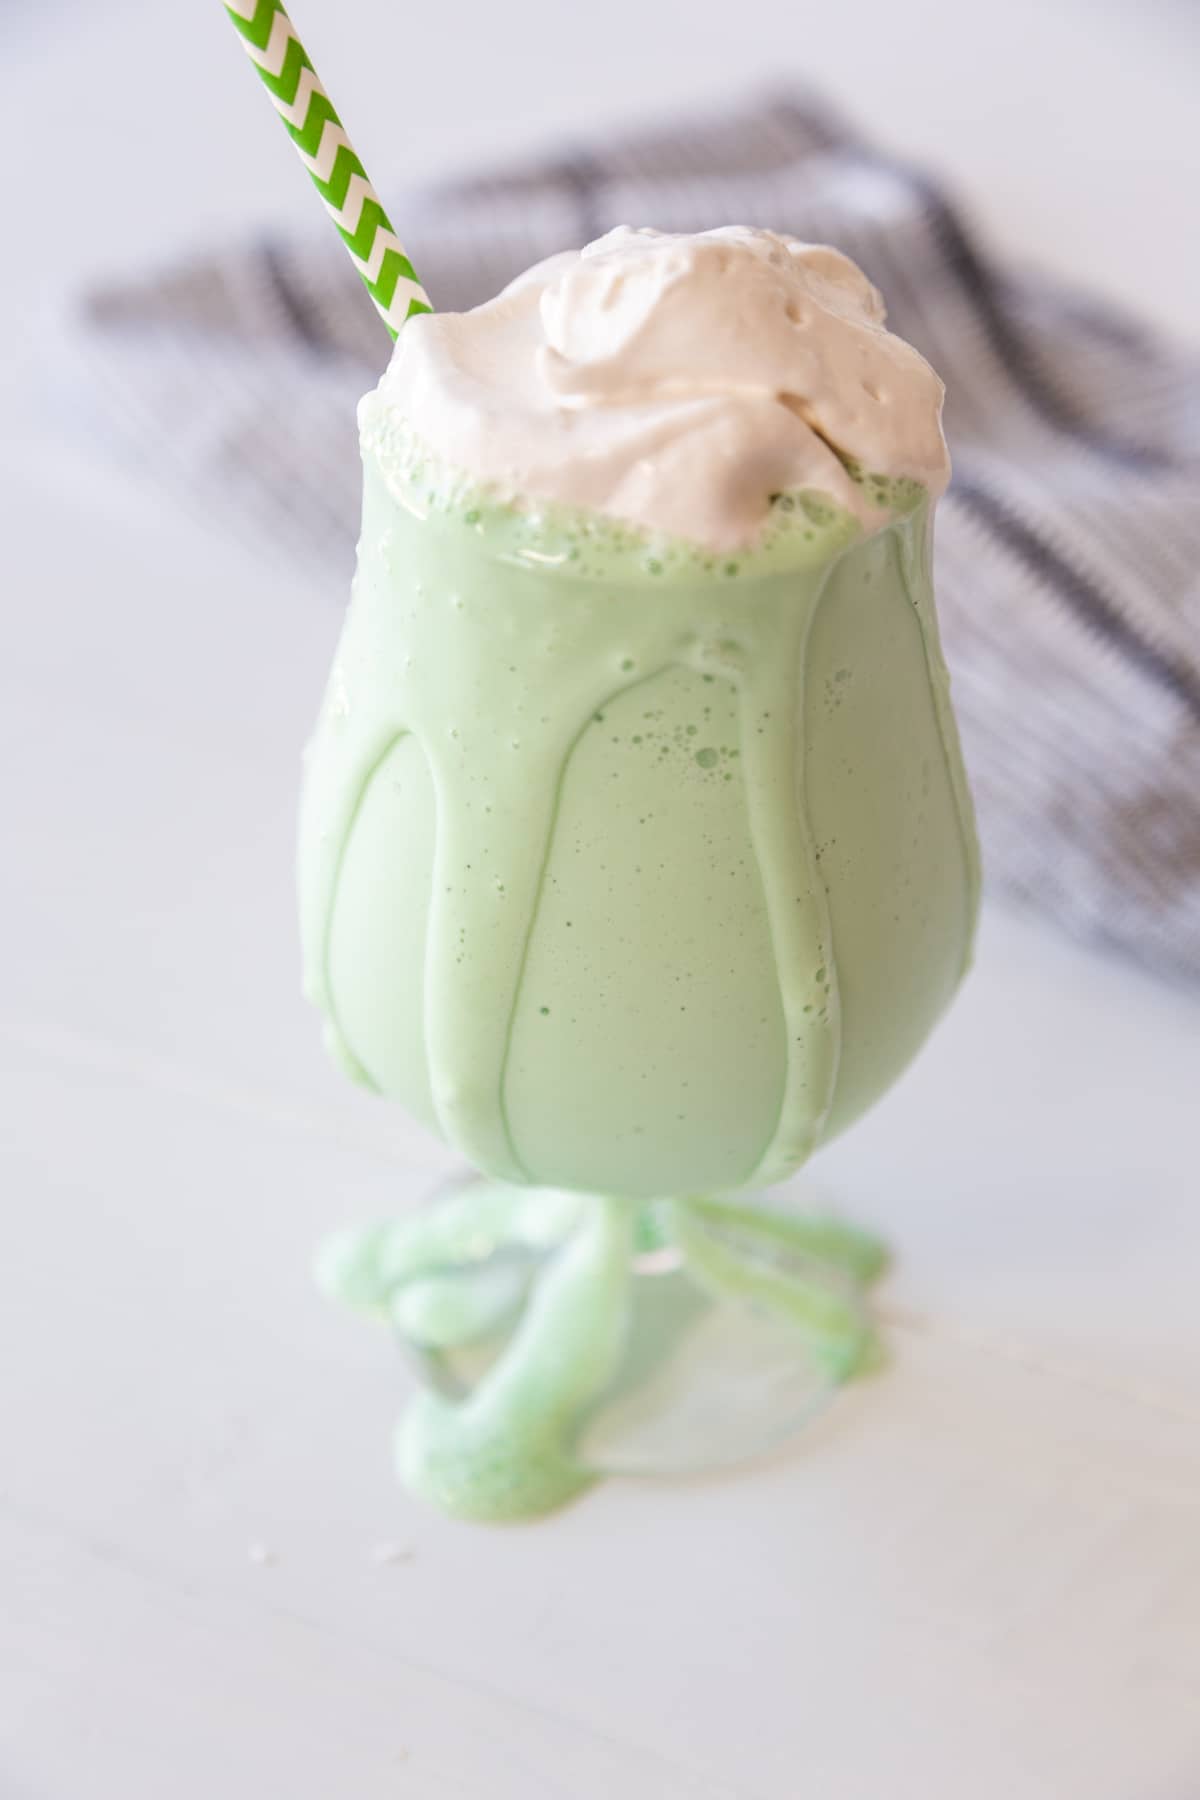 A green milkshake with whipped topping dripping down a glass.